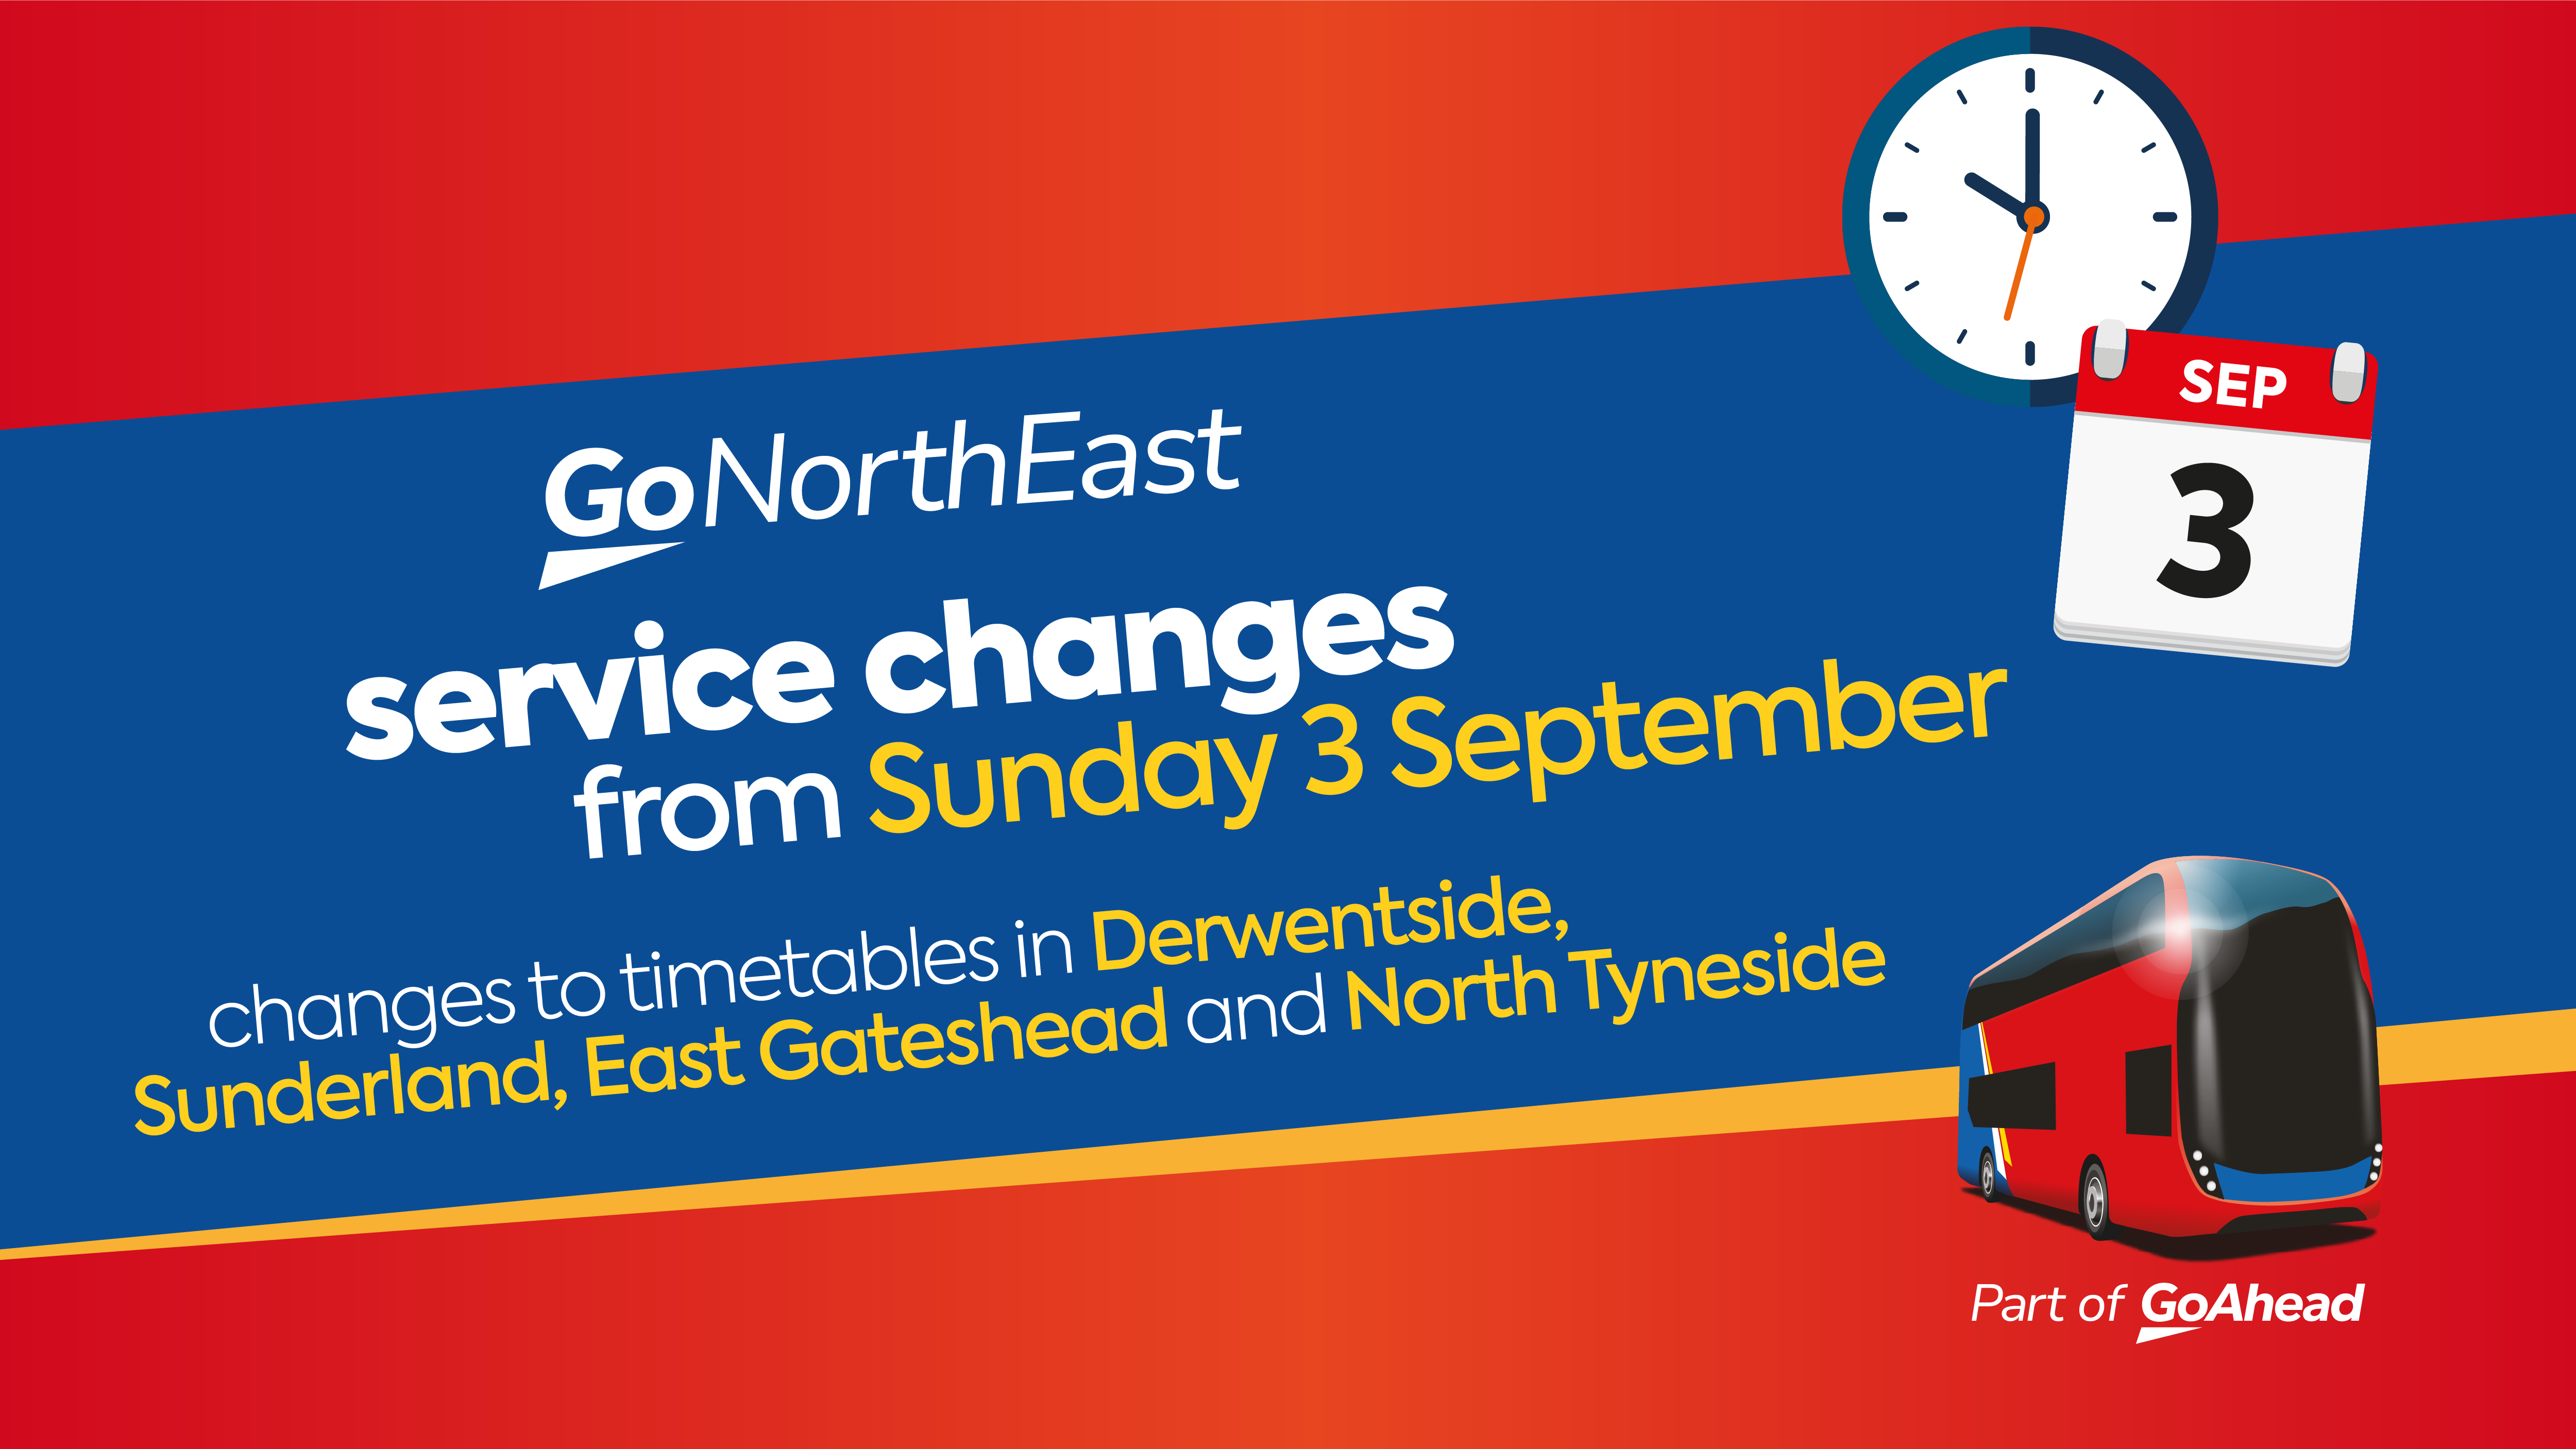 Summary of changes to services from Sunday 3 September